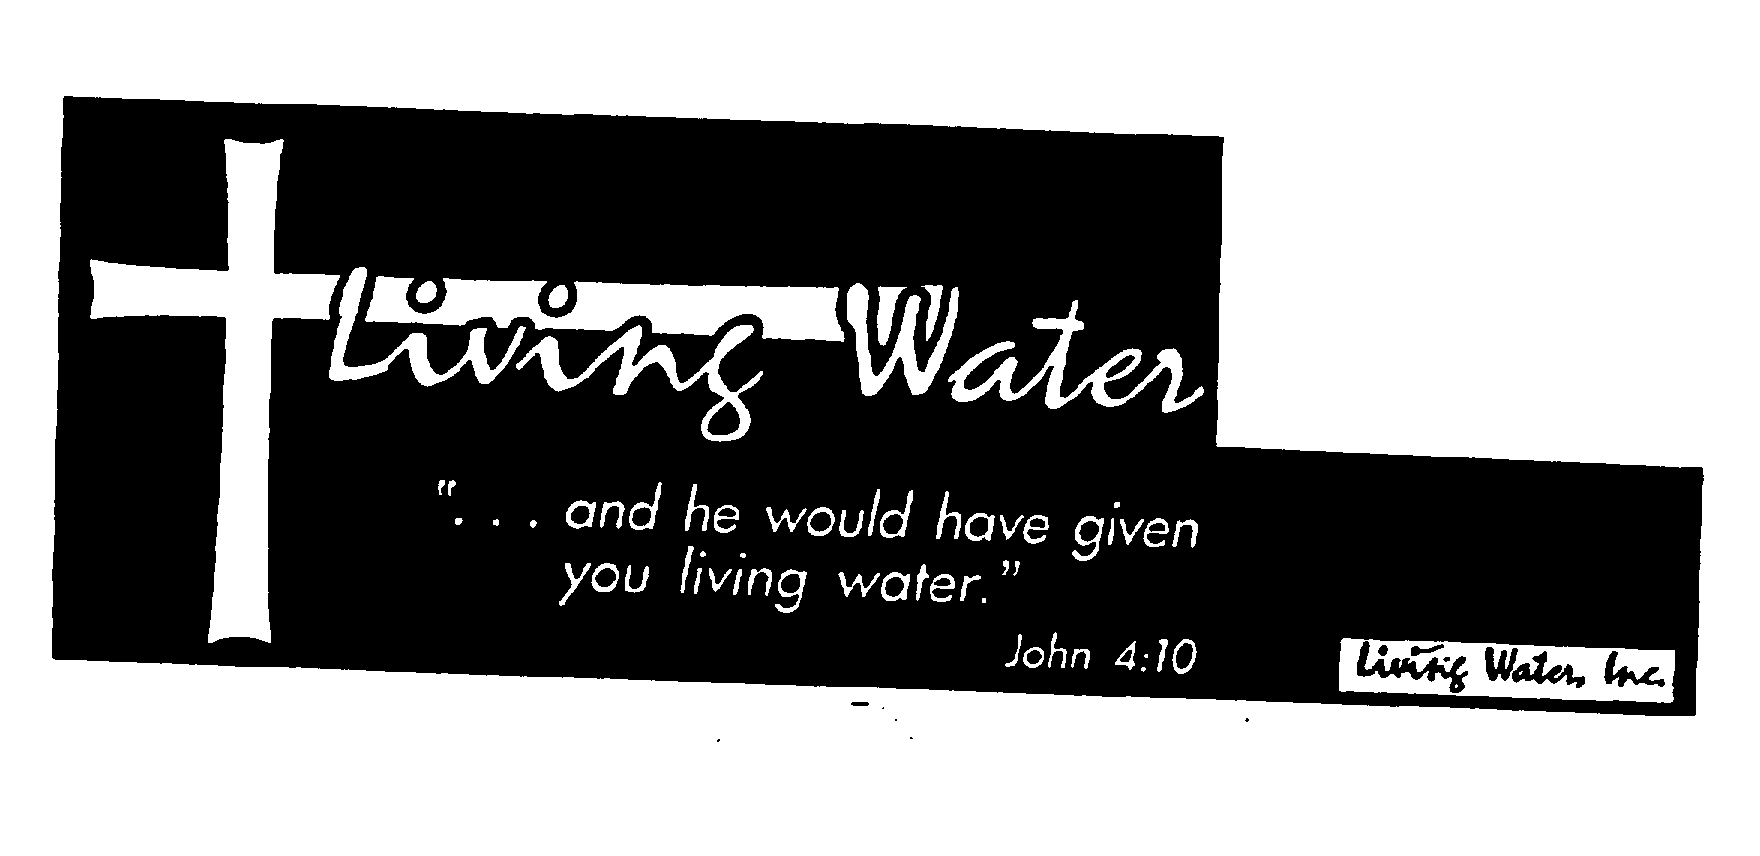  LIVING WATER" . . . AND HE WOULD HAVE GIVEN YOU LIVING WATER." JOHN 4:10 LIVING WATER, INC.